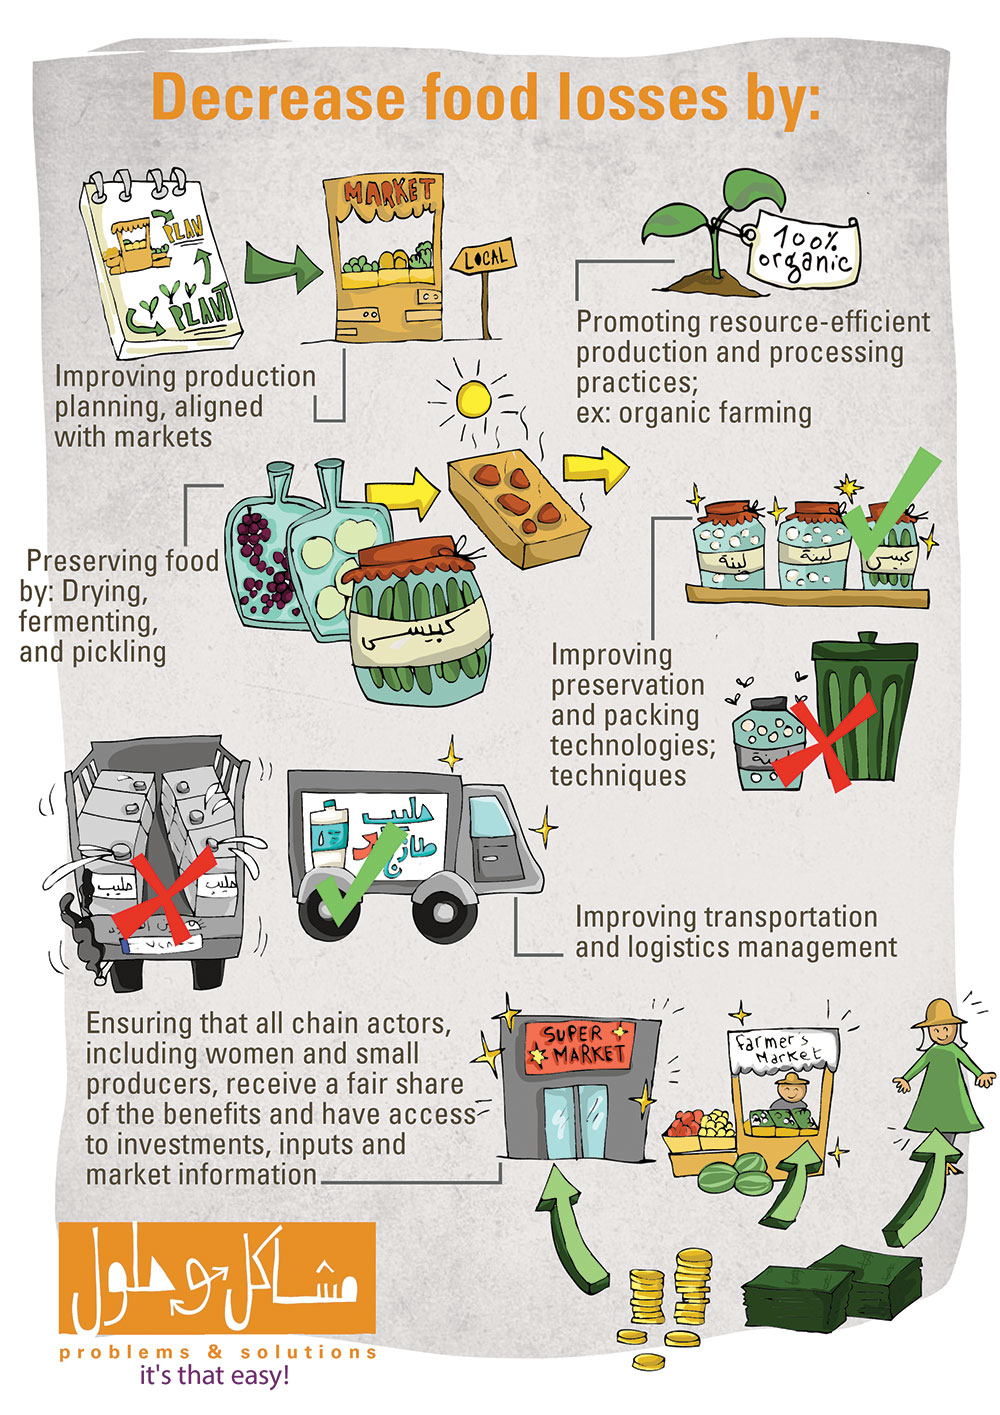 TIPS FOR FARMERS, PRODUCERS, AND CONSUMERS